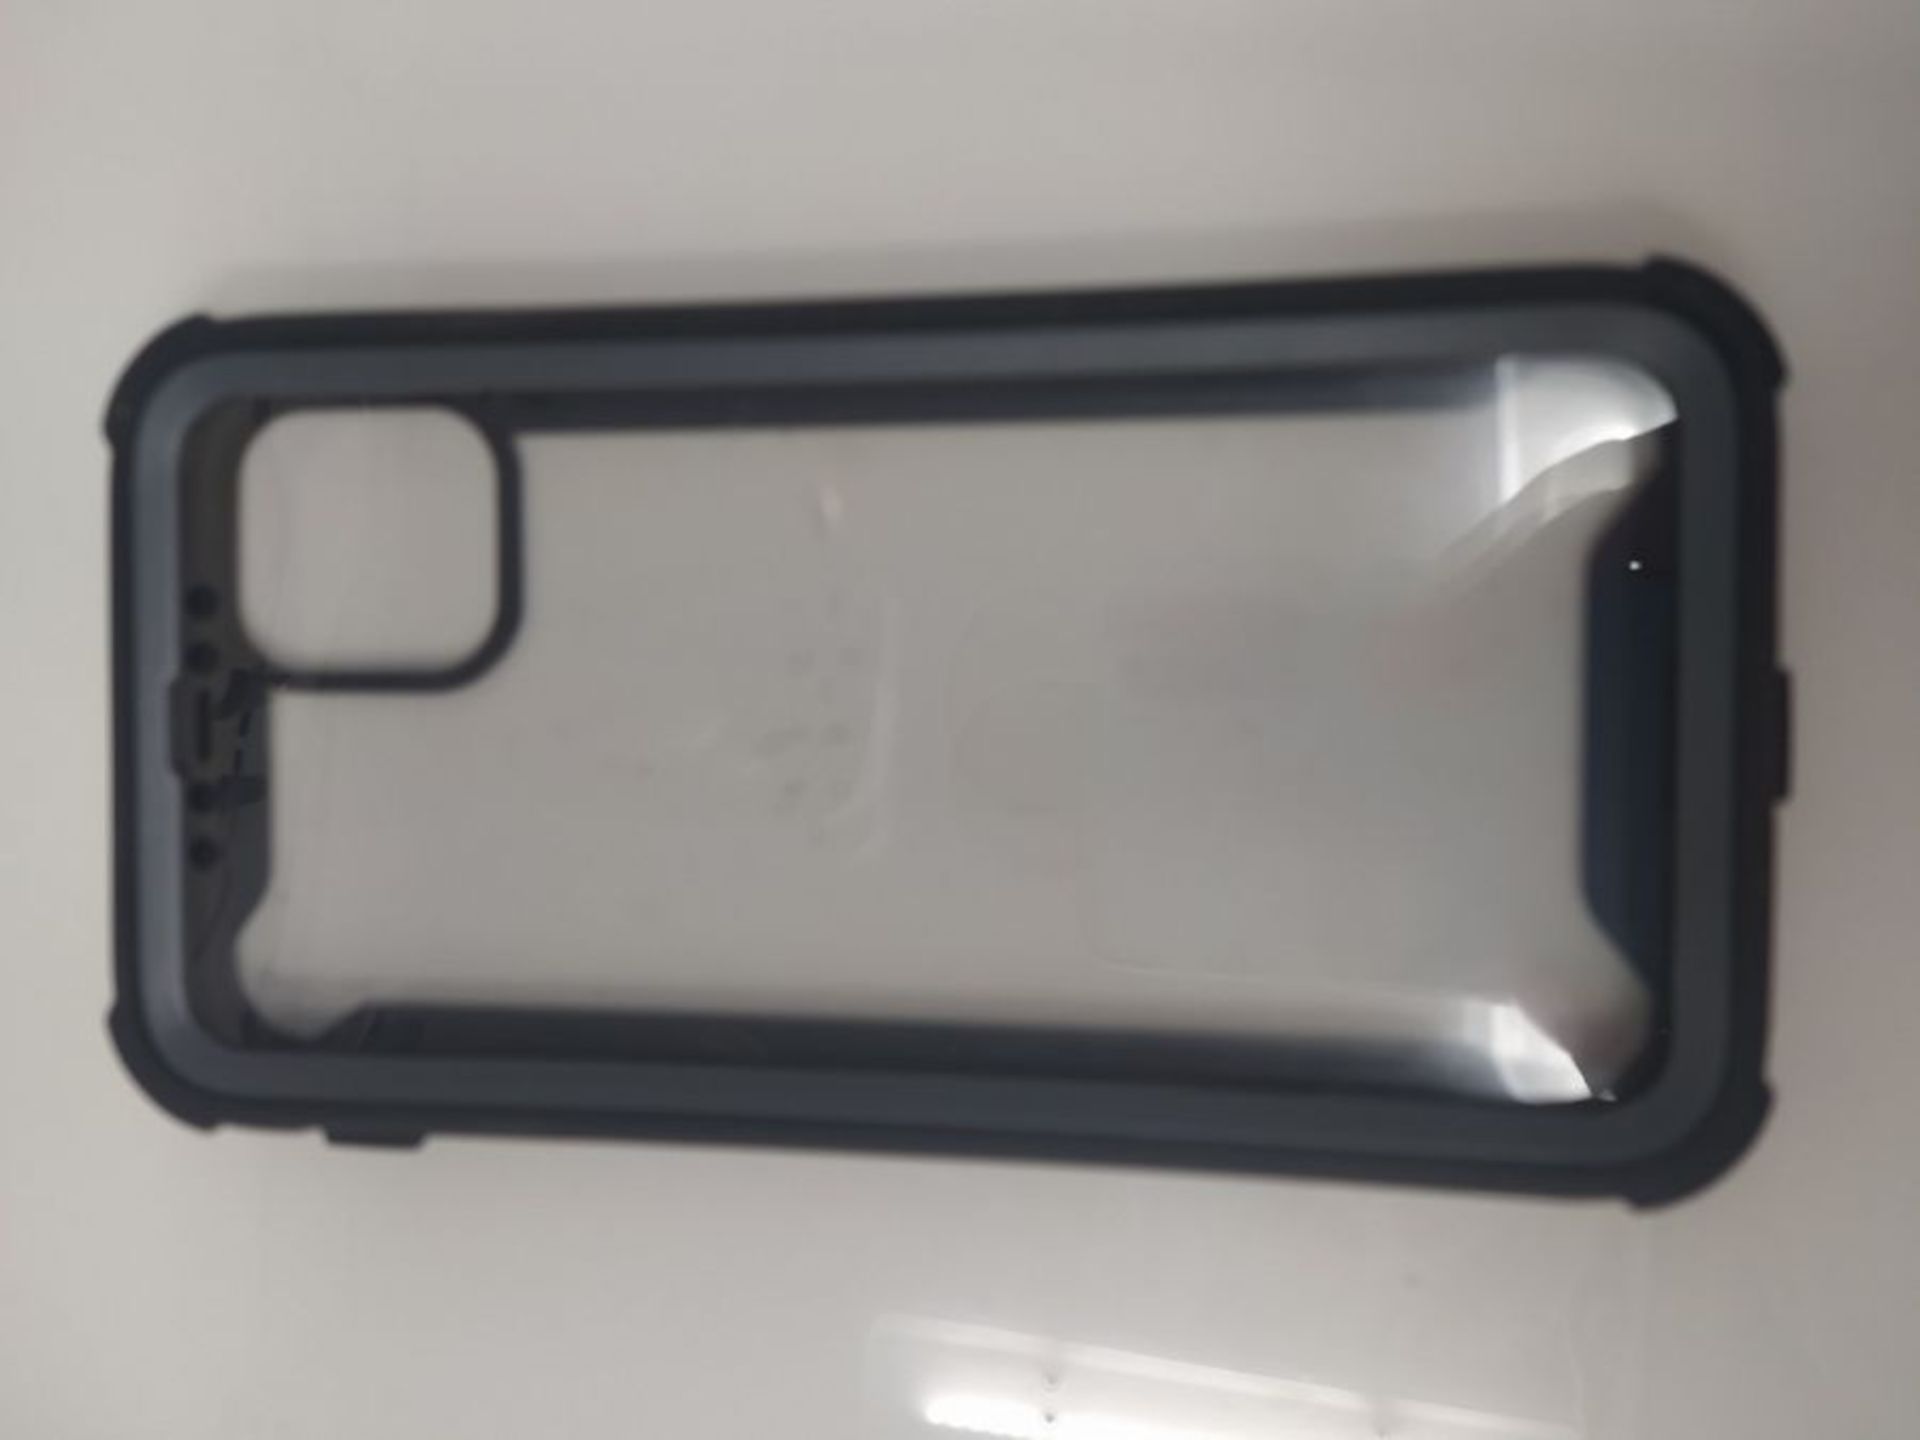 i-Blason Ares Case for iPhone 11 Pro Max 2019 Release, Dual Layer Rugged Clear Bumper - Image 3 of 3